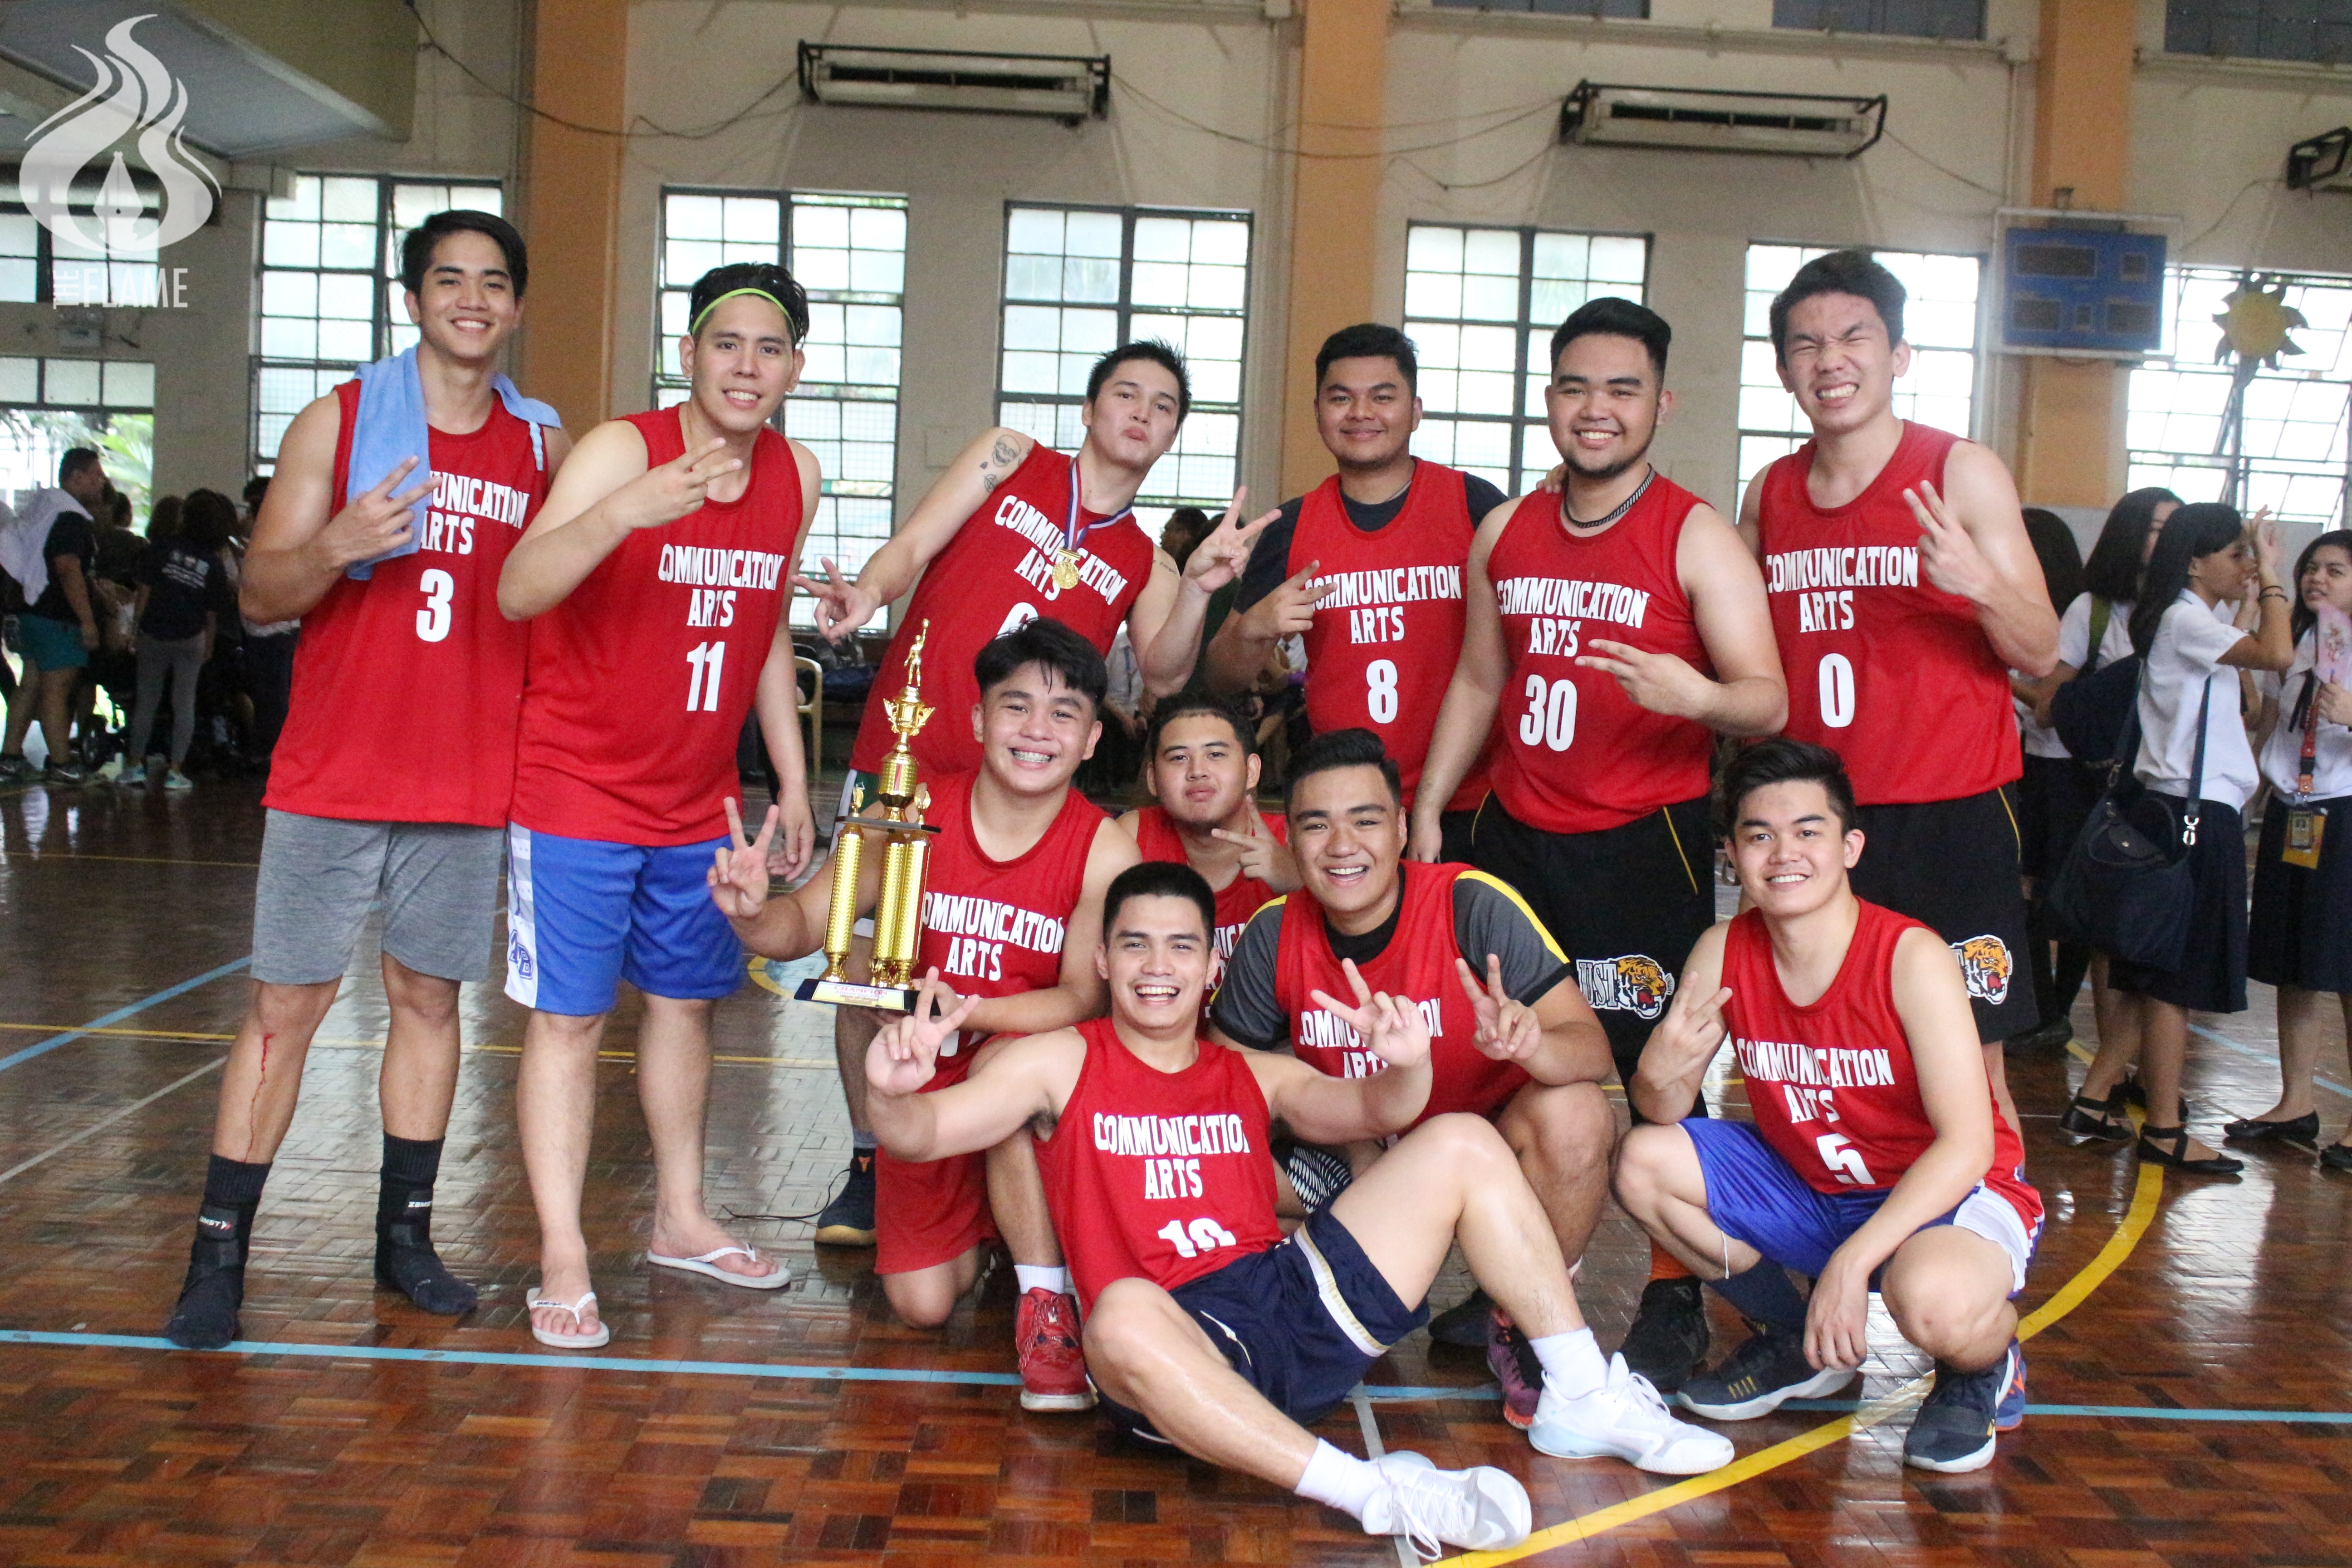 CA is back-to-back Athena Cup basketball champion